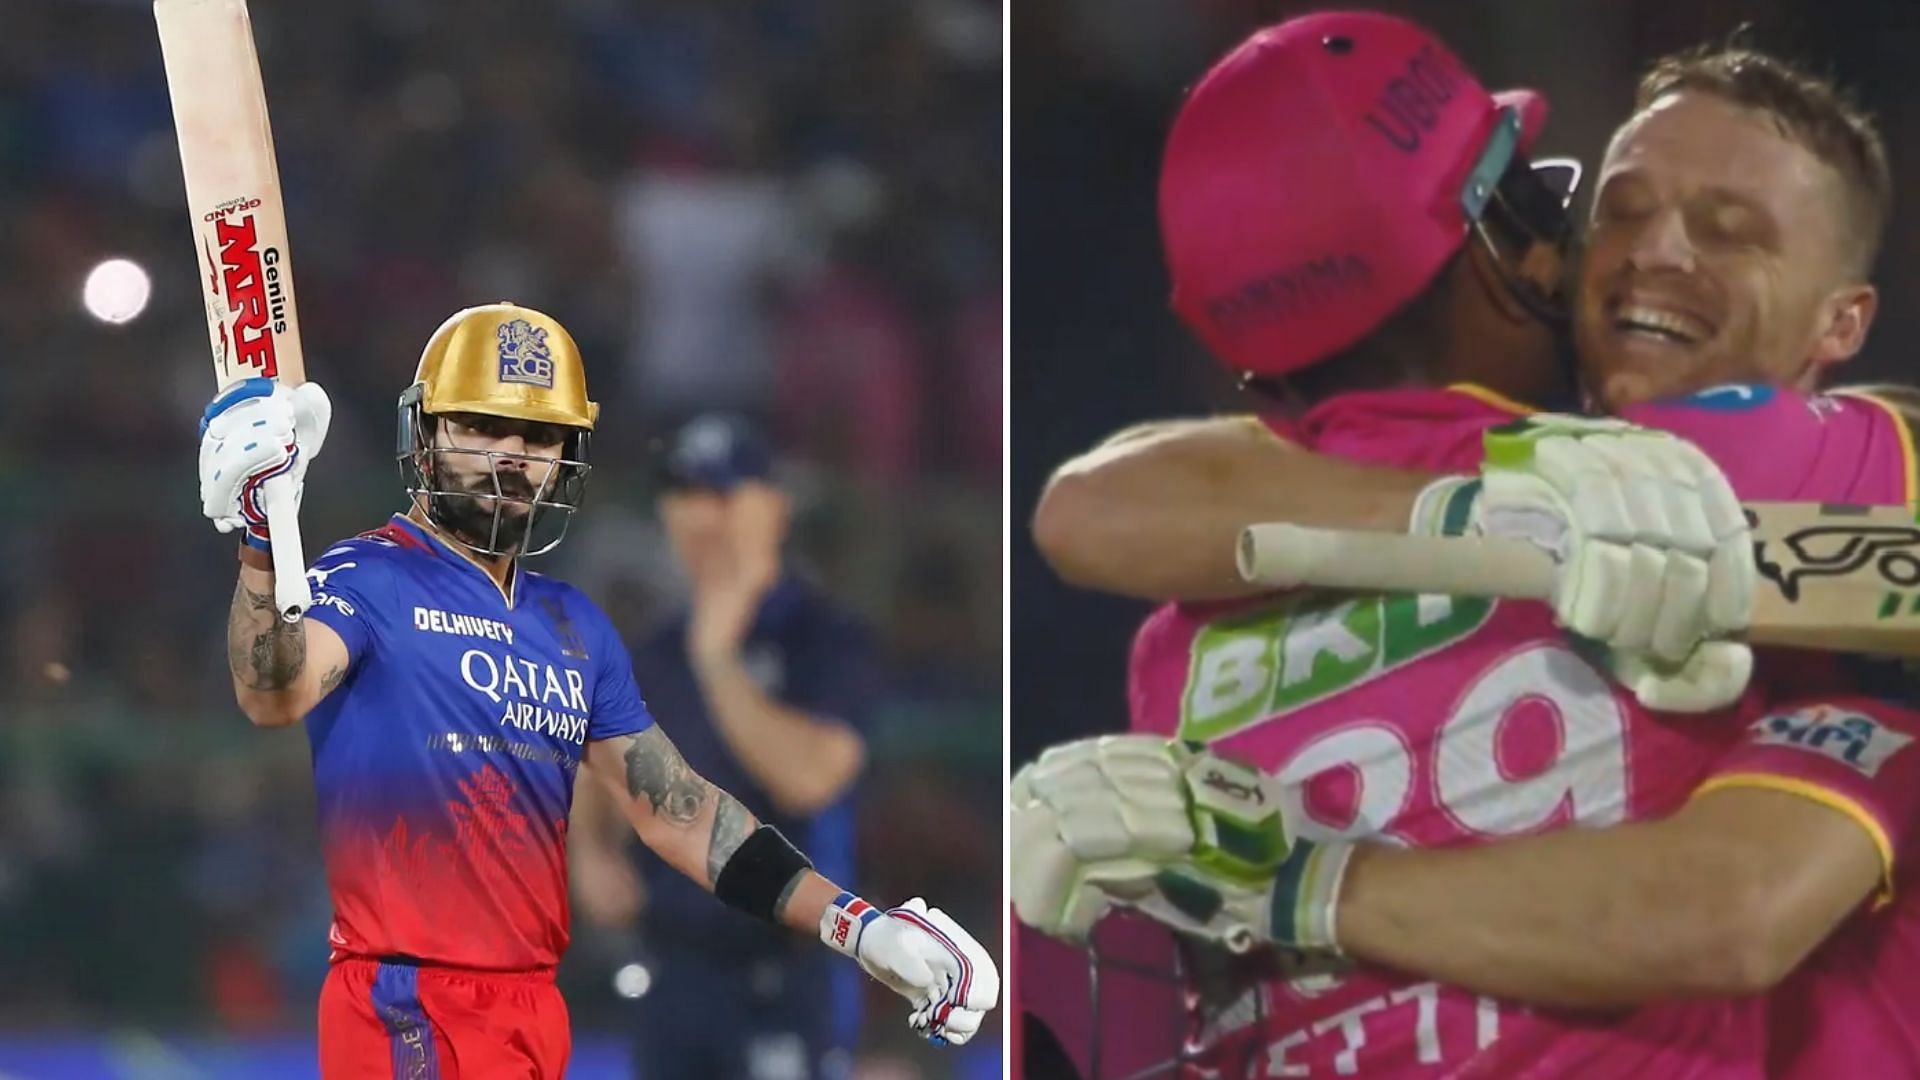 Some moments from the RR vs RCB encounter that went viral on social media